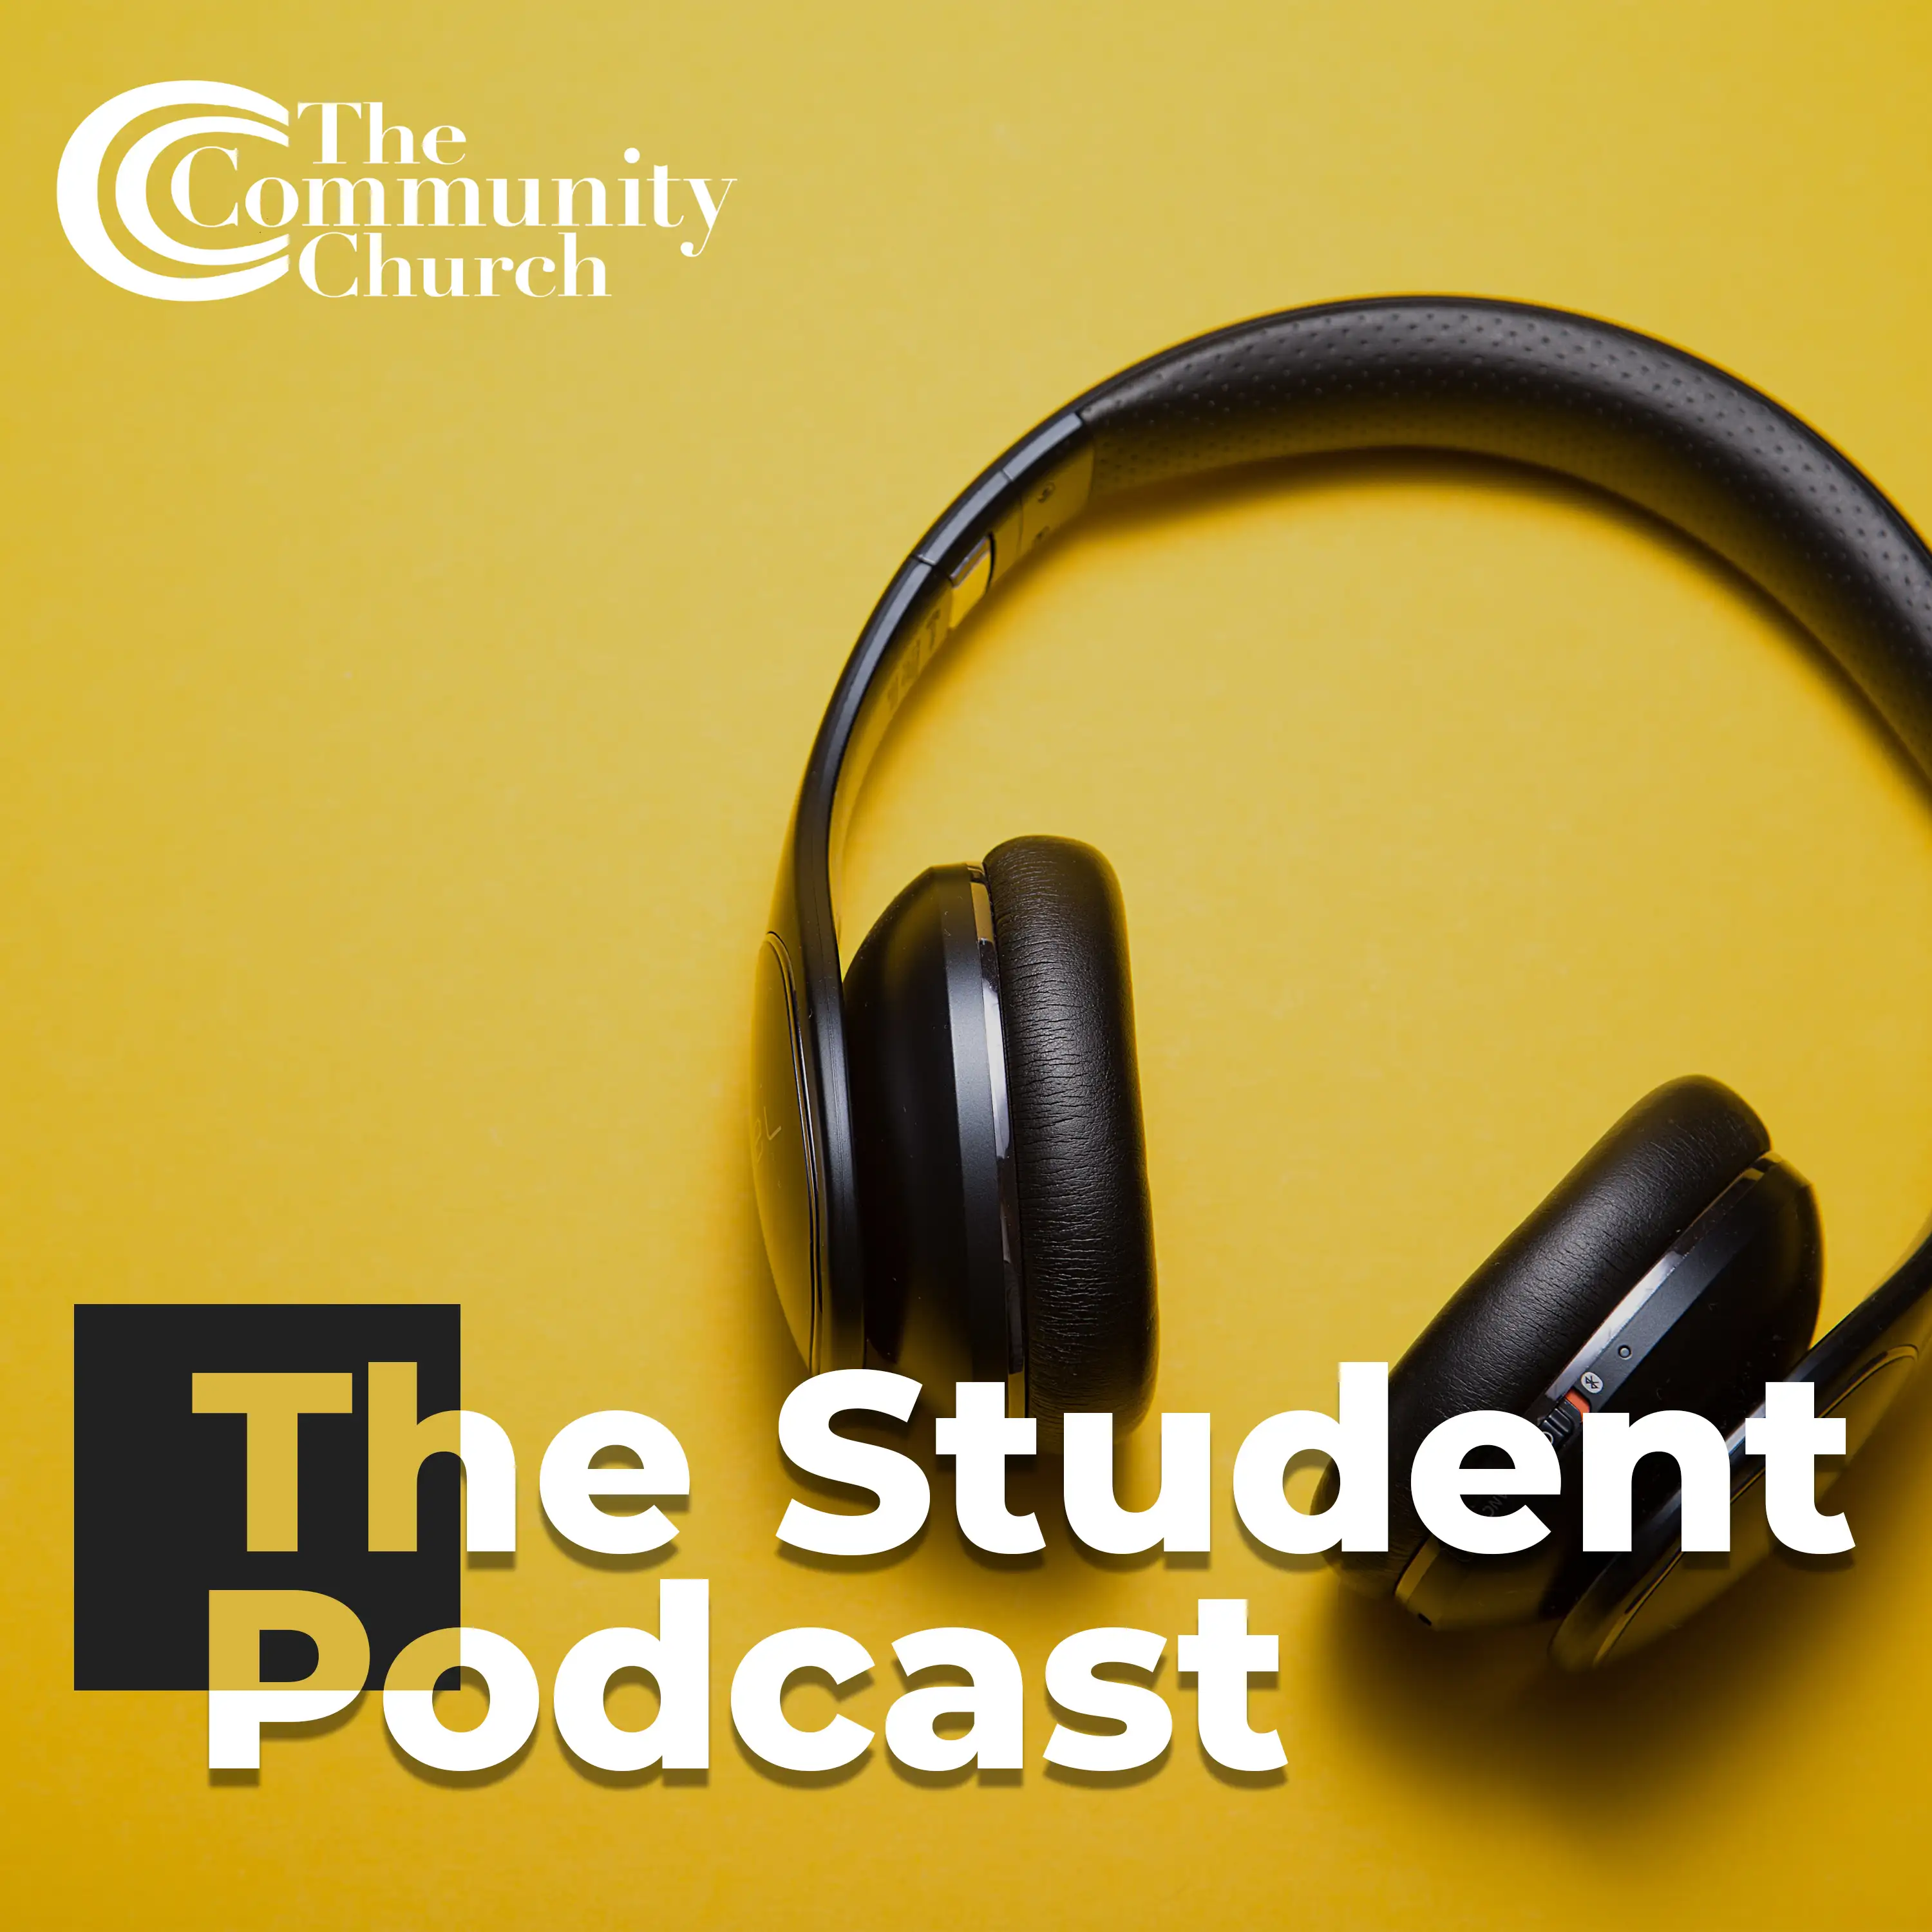 The Student Podcast